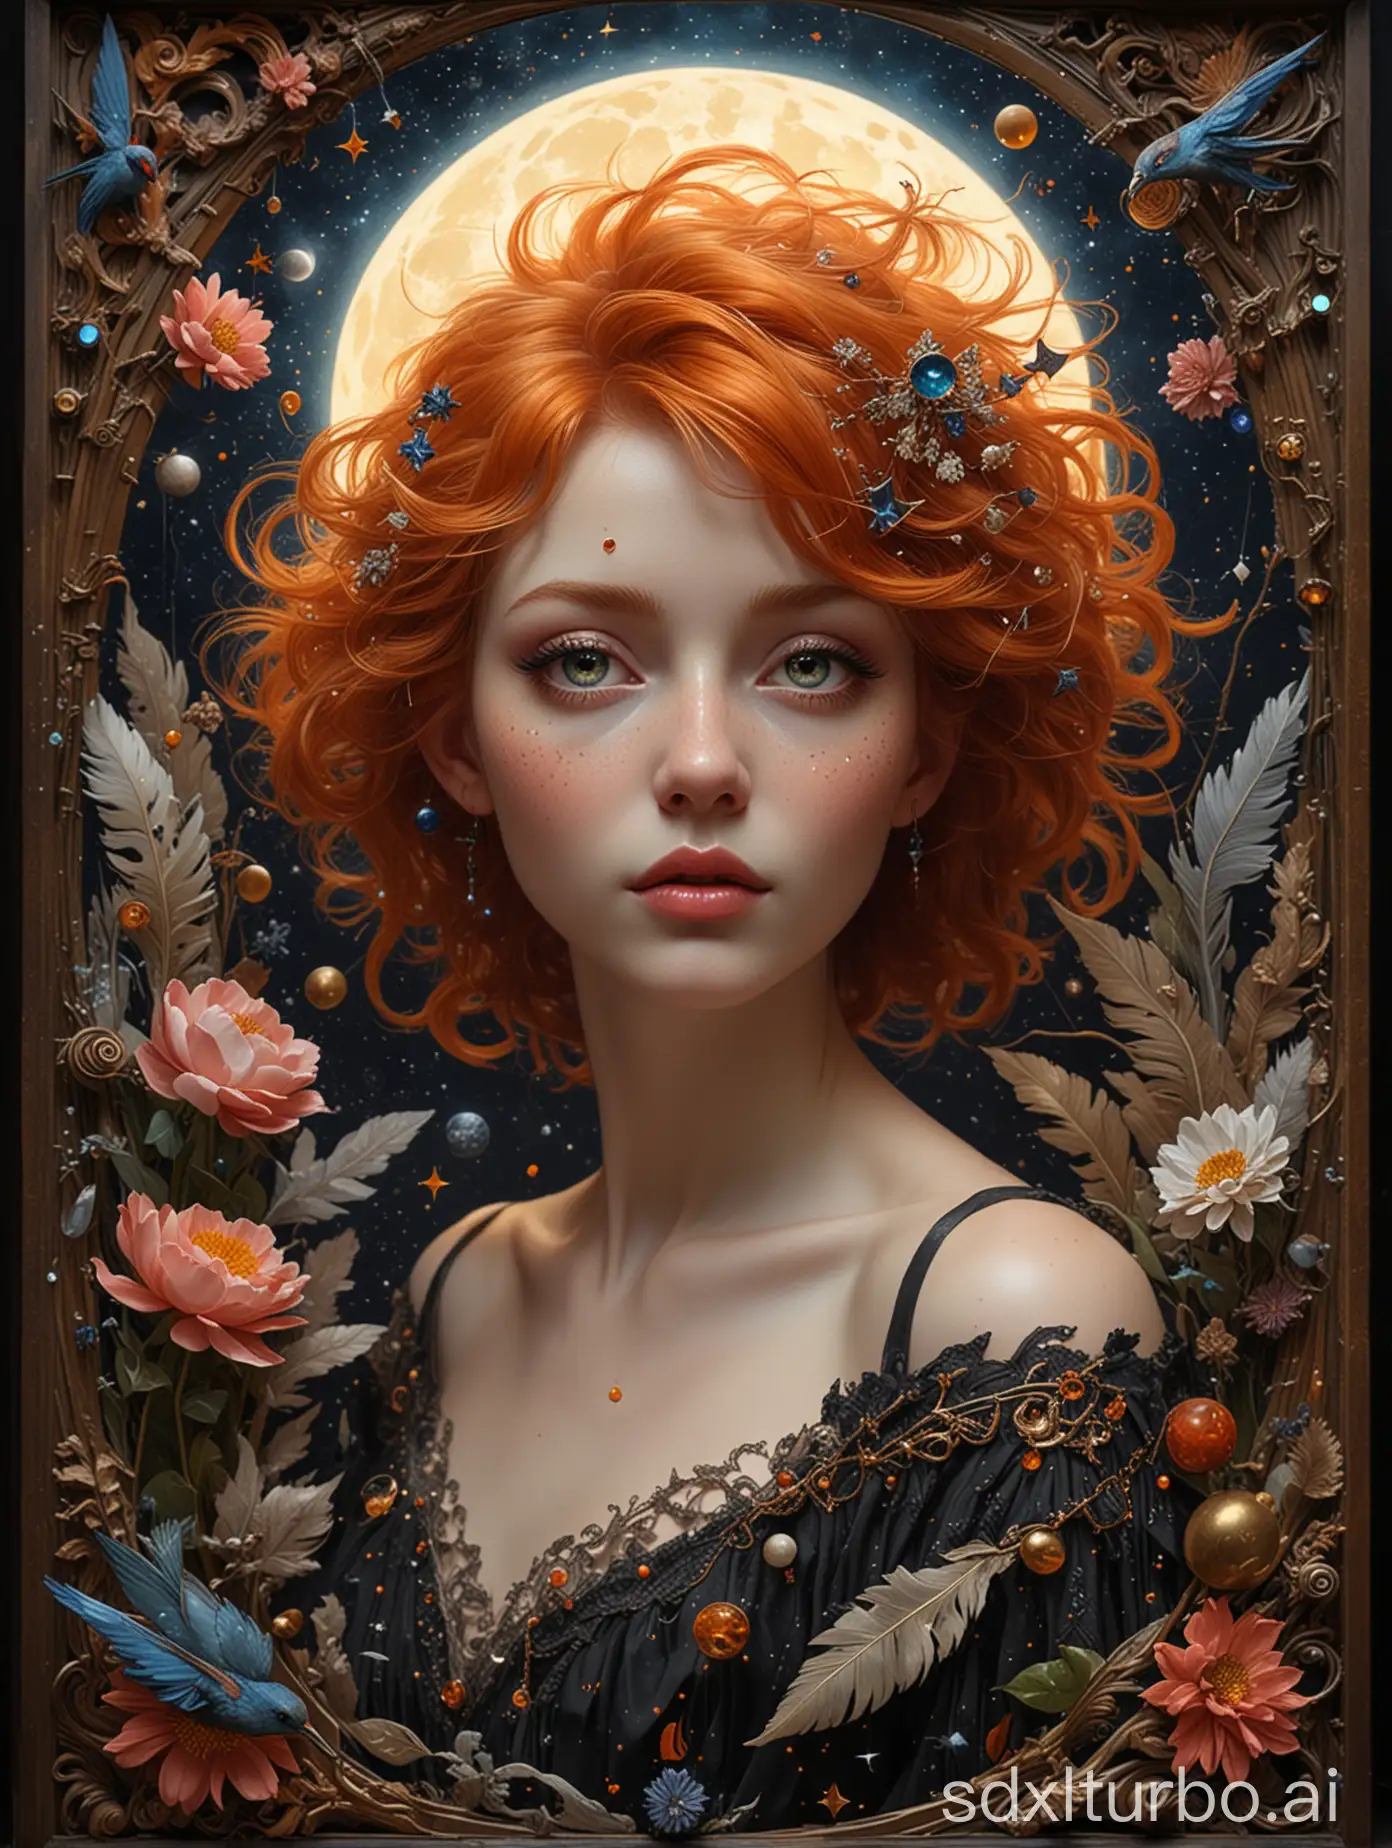 Witchy-Ritualistic-Surrealism-Glowing-GingerHaired-Moonkissed-Fairy-Holding-Moon